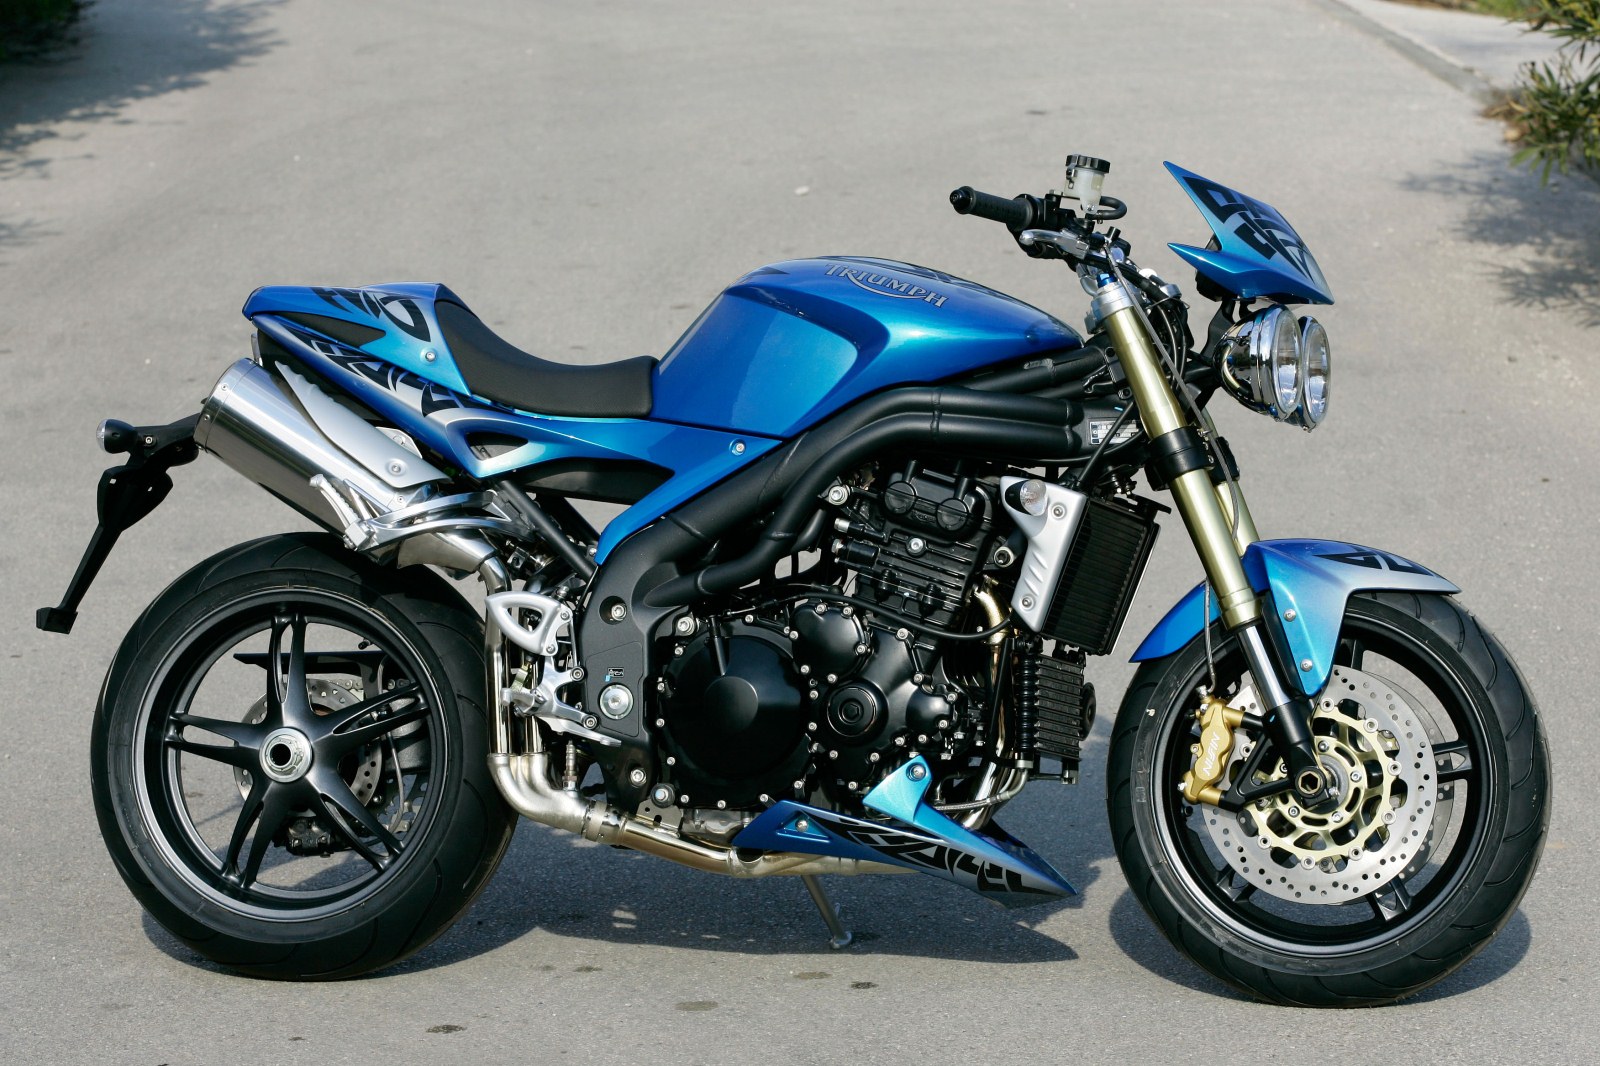 2005 Triumph Speed Triple Photos, Informations, Articles 